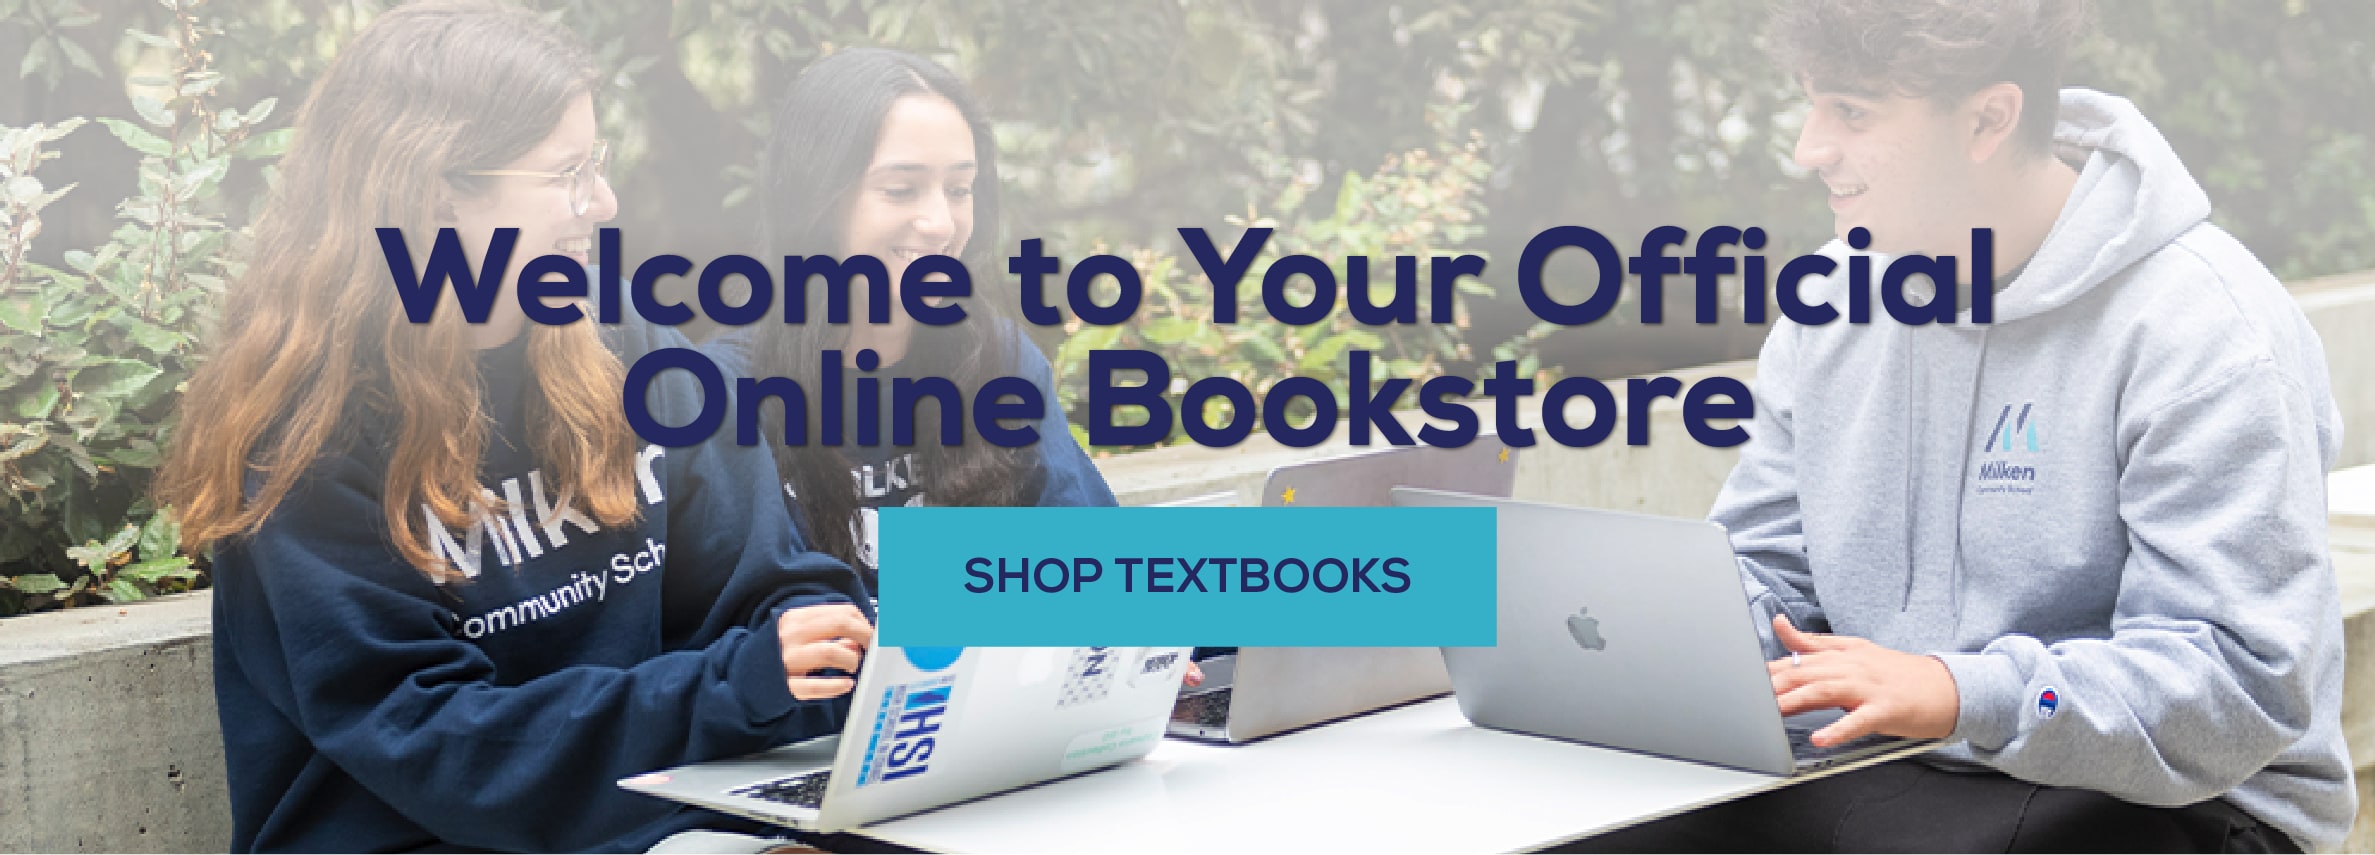 Welcome to your official online bookstore! Shop Textbooks